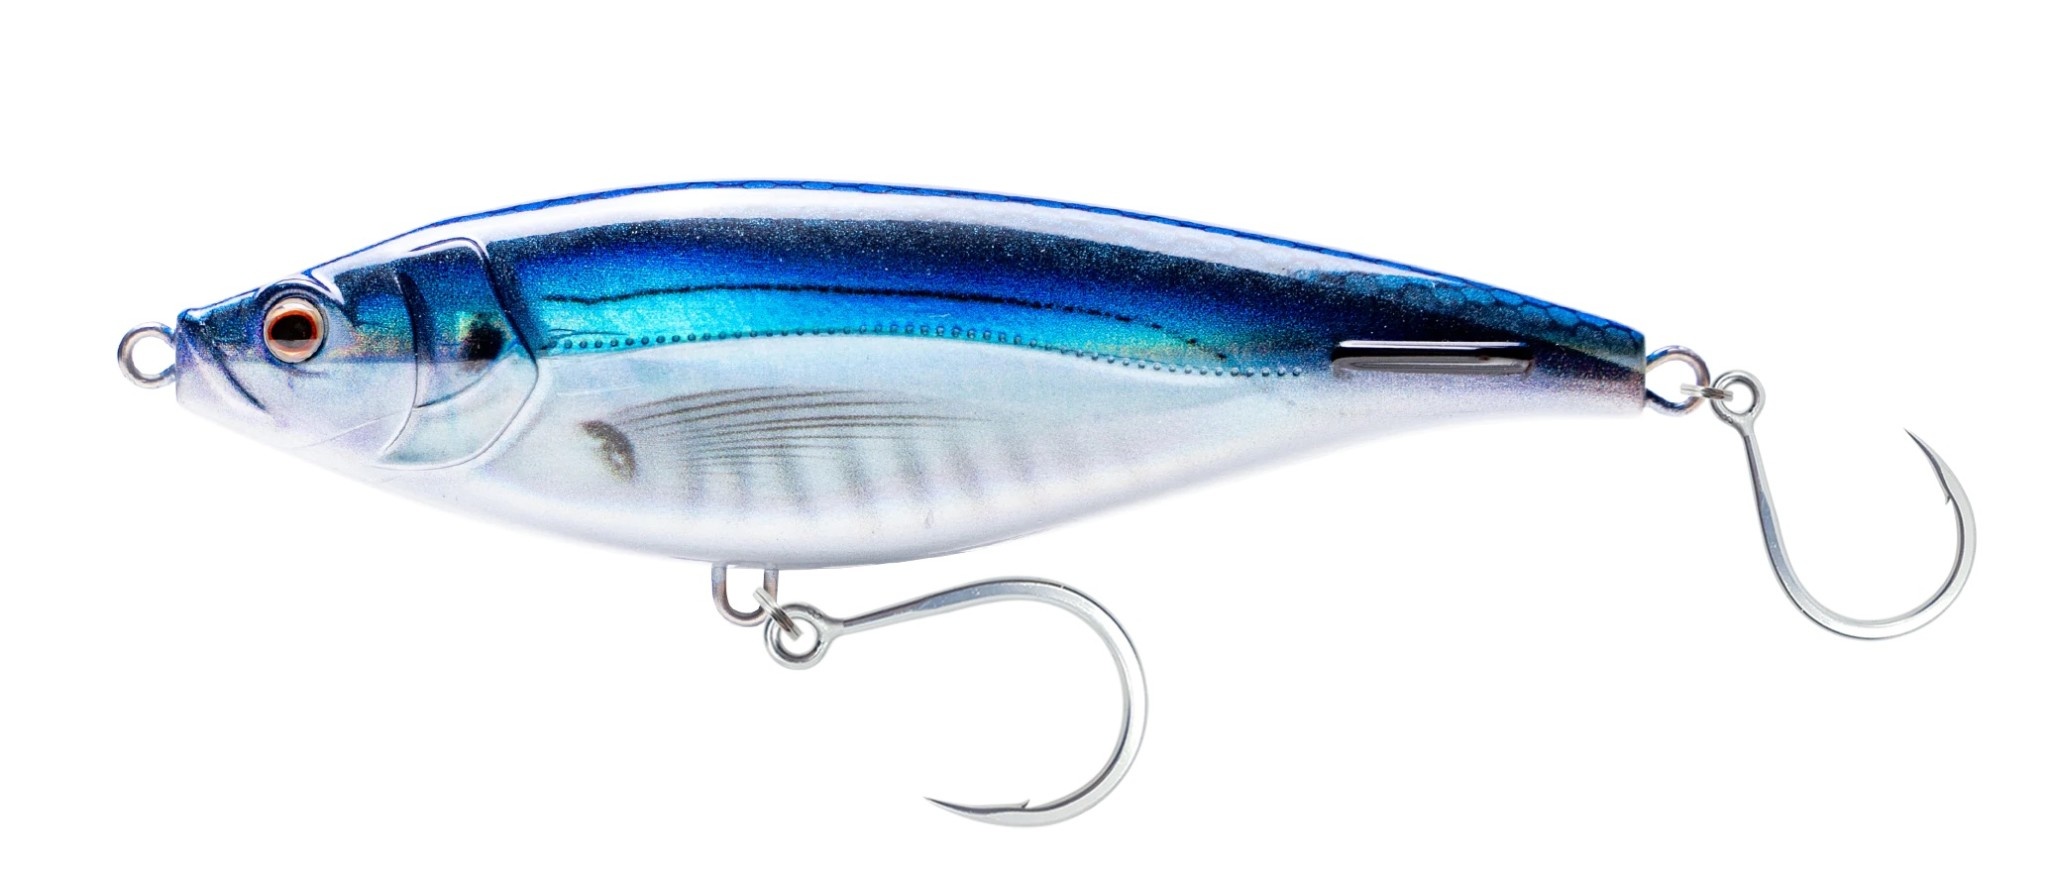 Nomad MADSCAD150-BBS Madscad 150mm 75g Blue Back Shad - Angler's Choice  Tackle